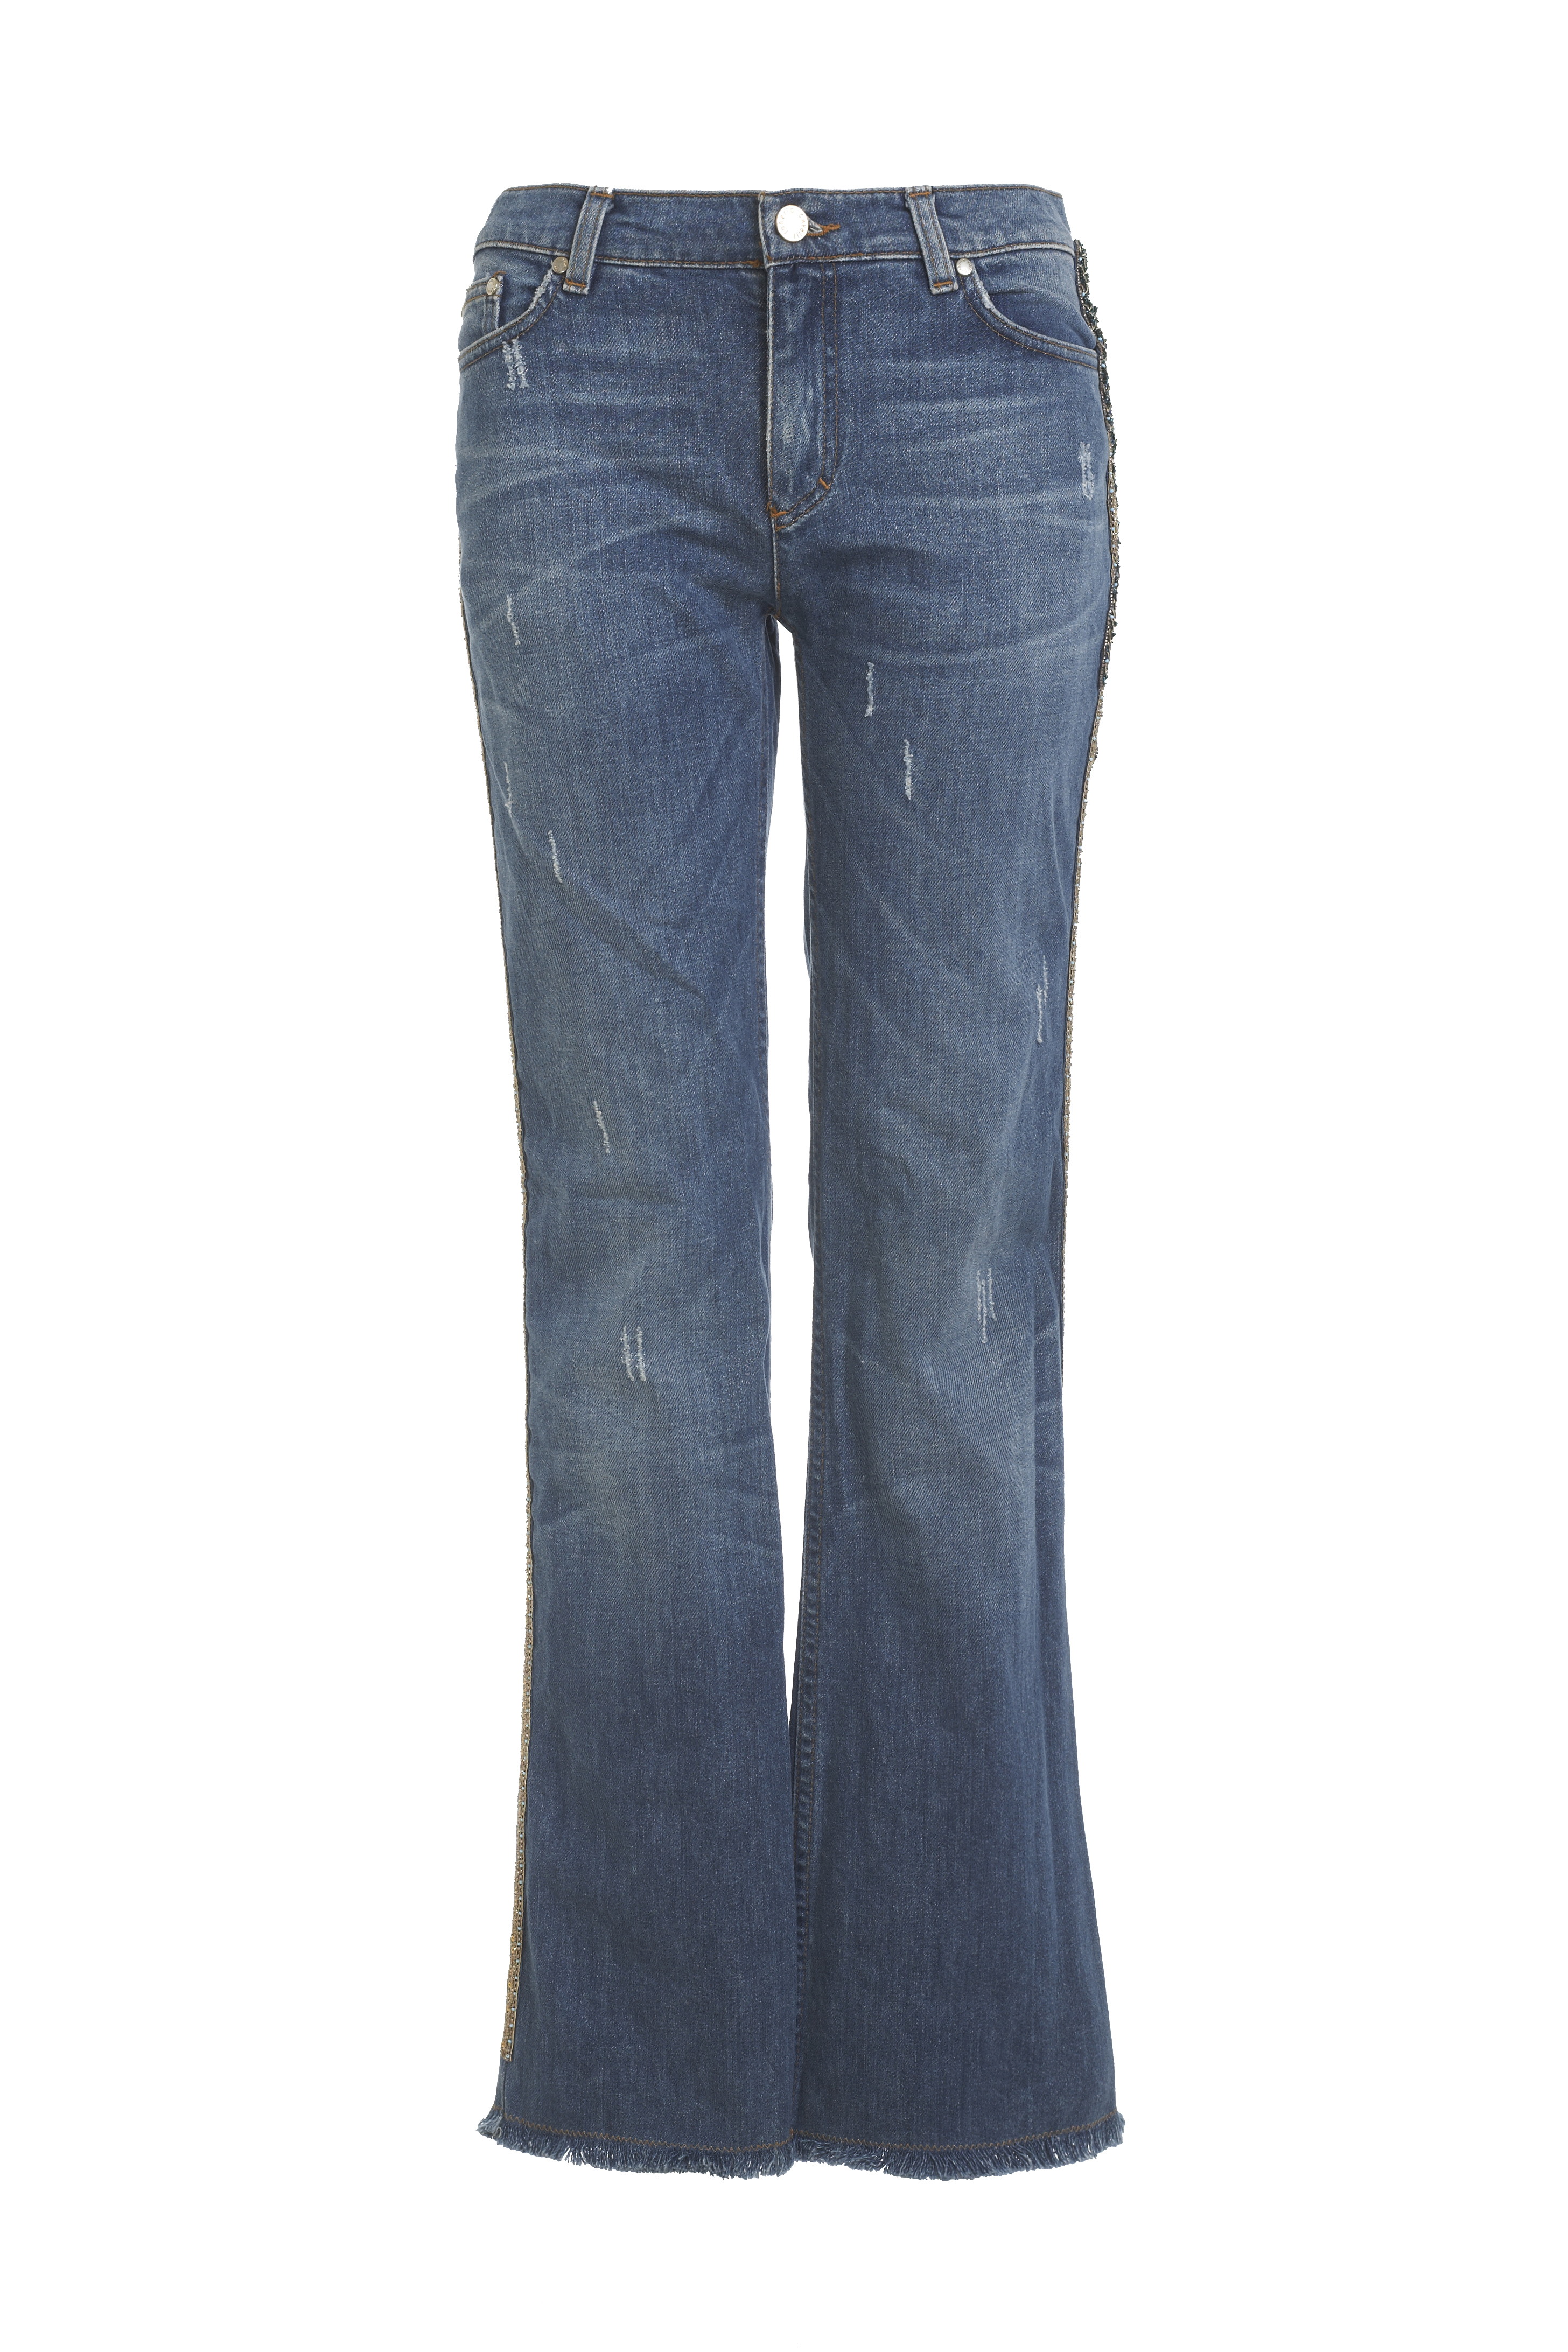 Roberto Cavalli blue denim jeans with green and gold crystal snake ...